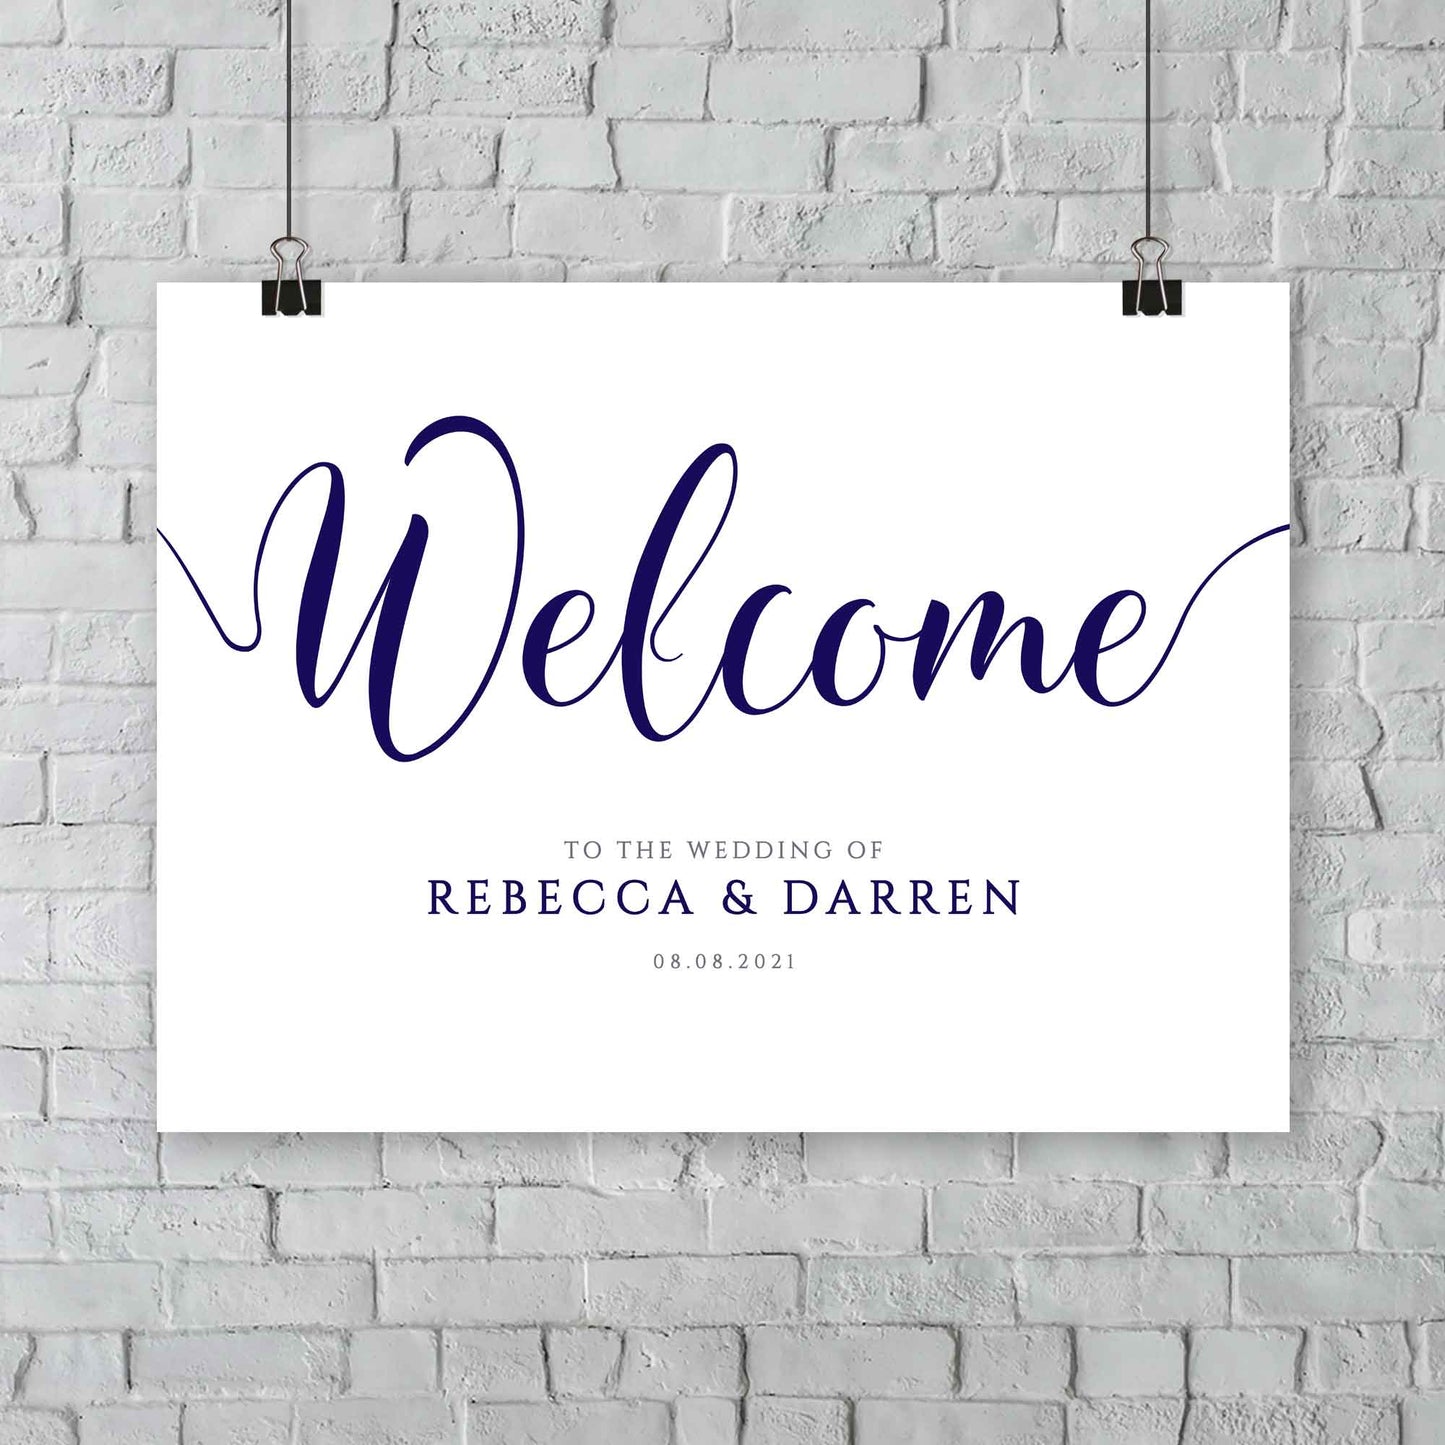 navy welcome signage with editable bride and groom names and wedding date